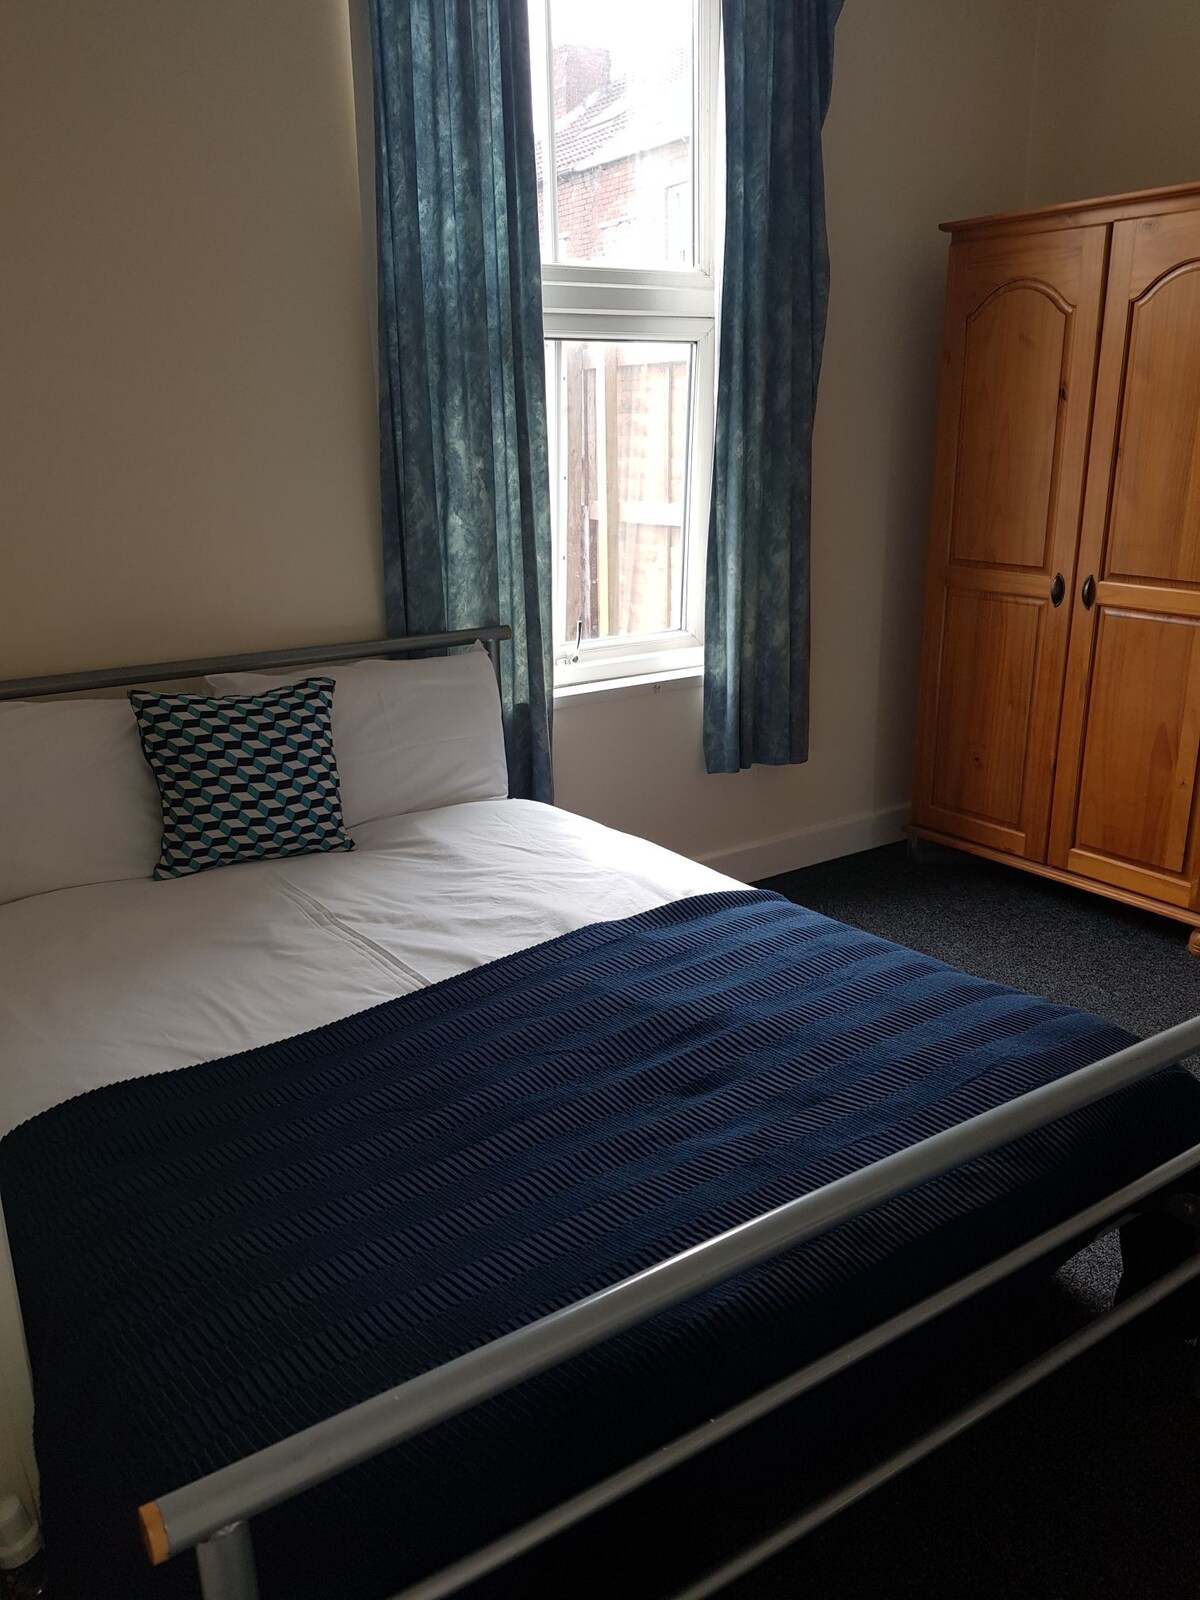 Ensuite Rooms near City Centre and Universities